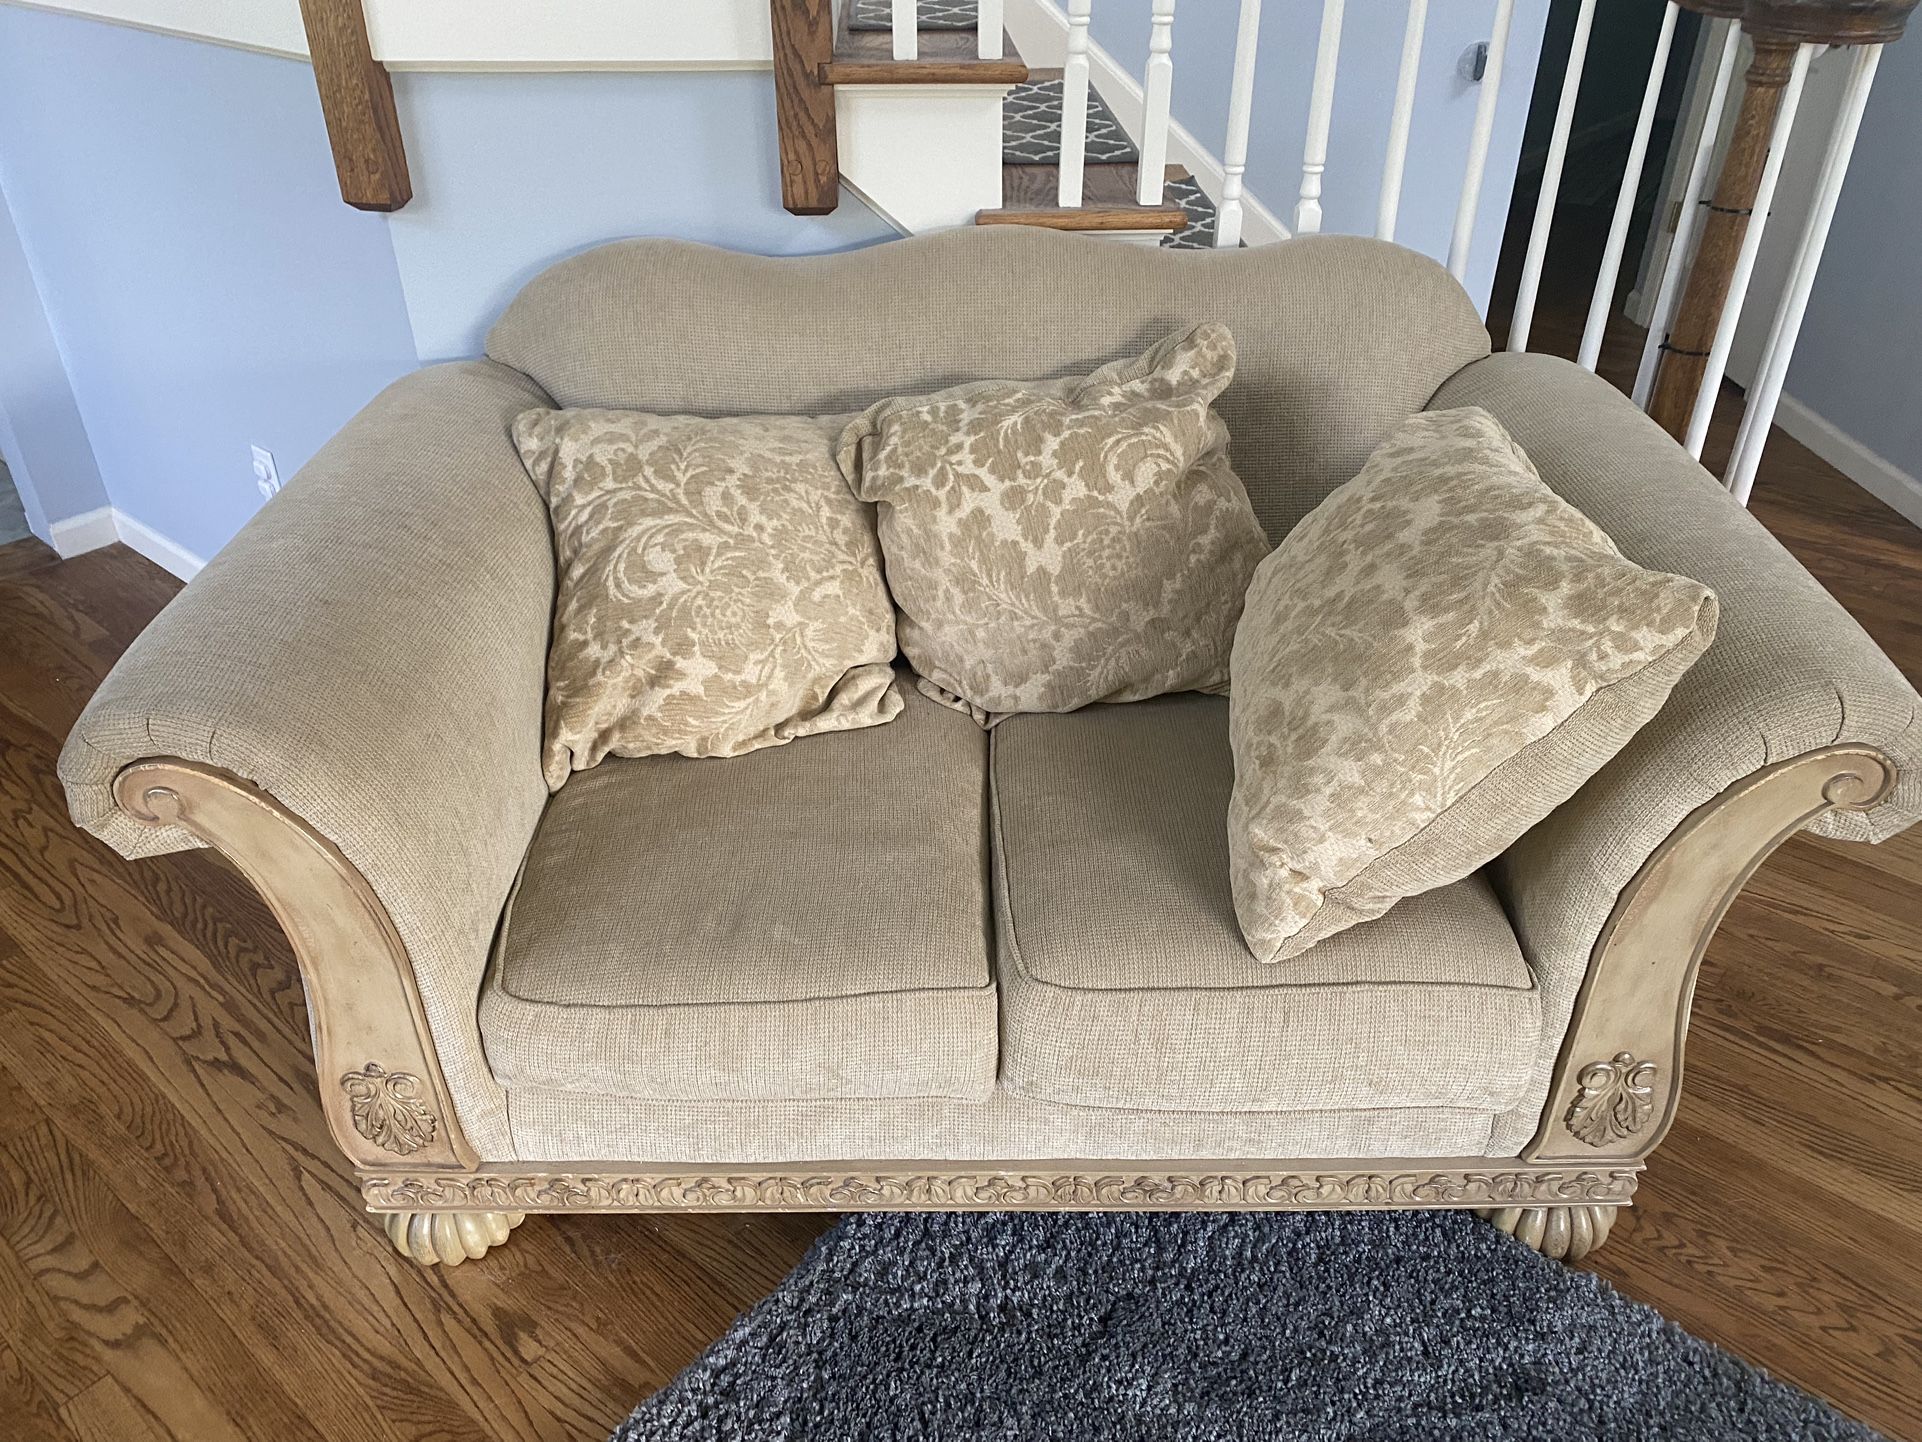 Couch sofa off white with pillows